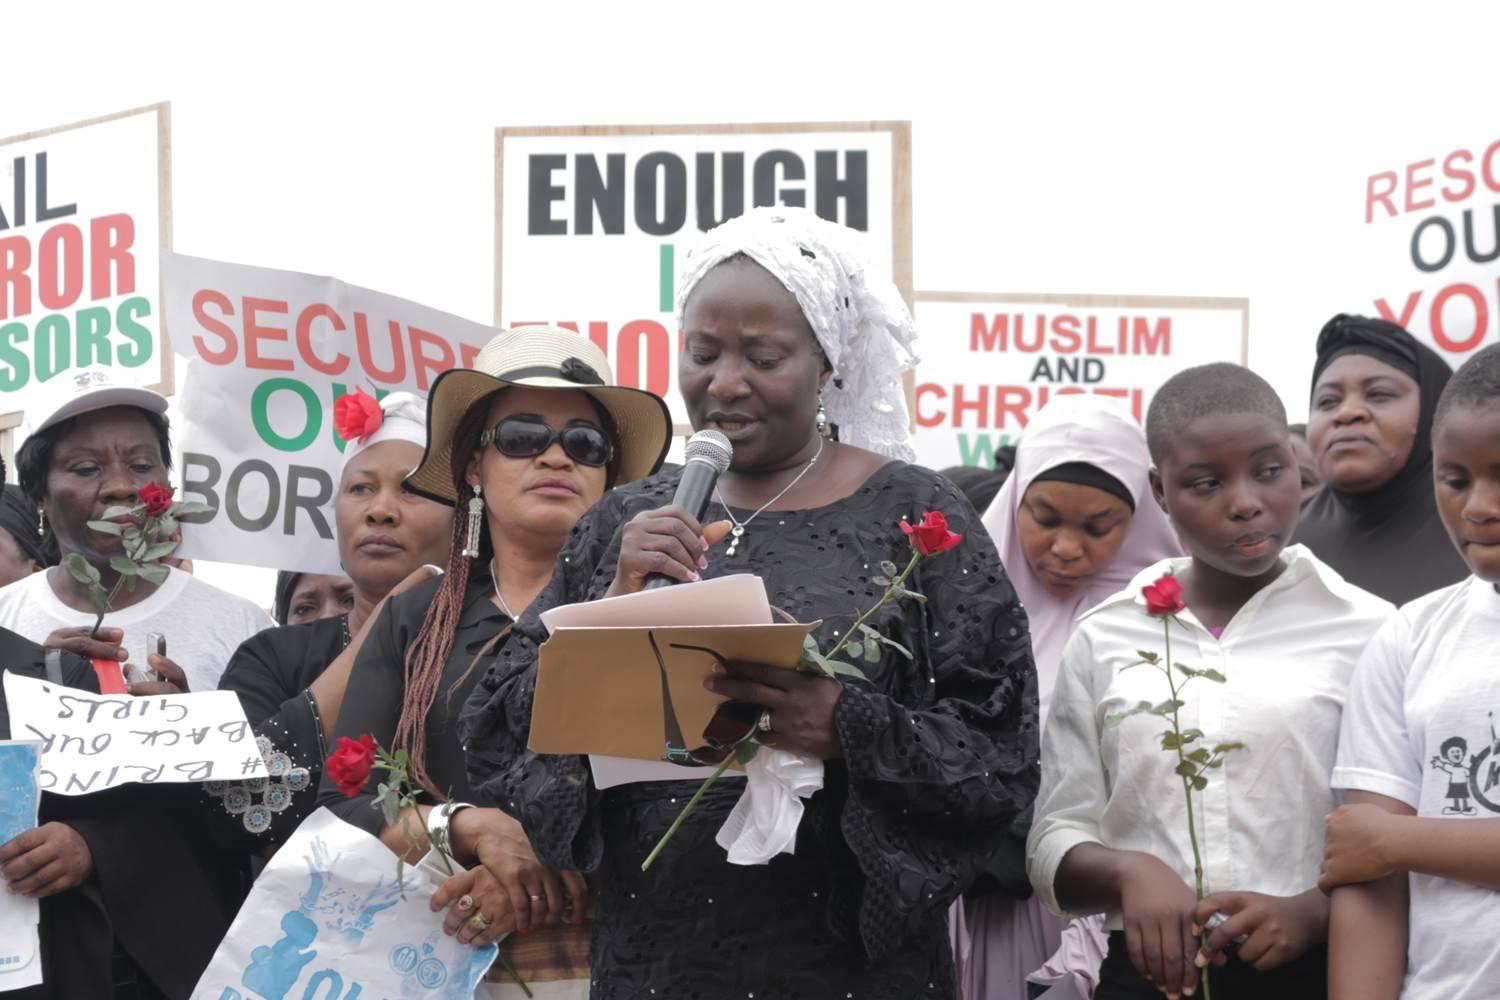 Nigerian pastor Esther Ibanga joined with Muslim leaders in the city of Jos to call for the return of Chibok girls who were kidnapped by the extremist group Boko Haram.